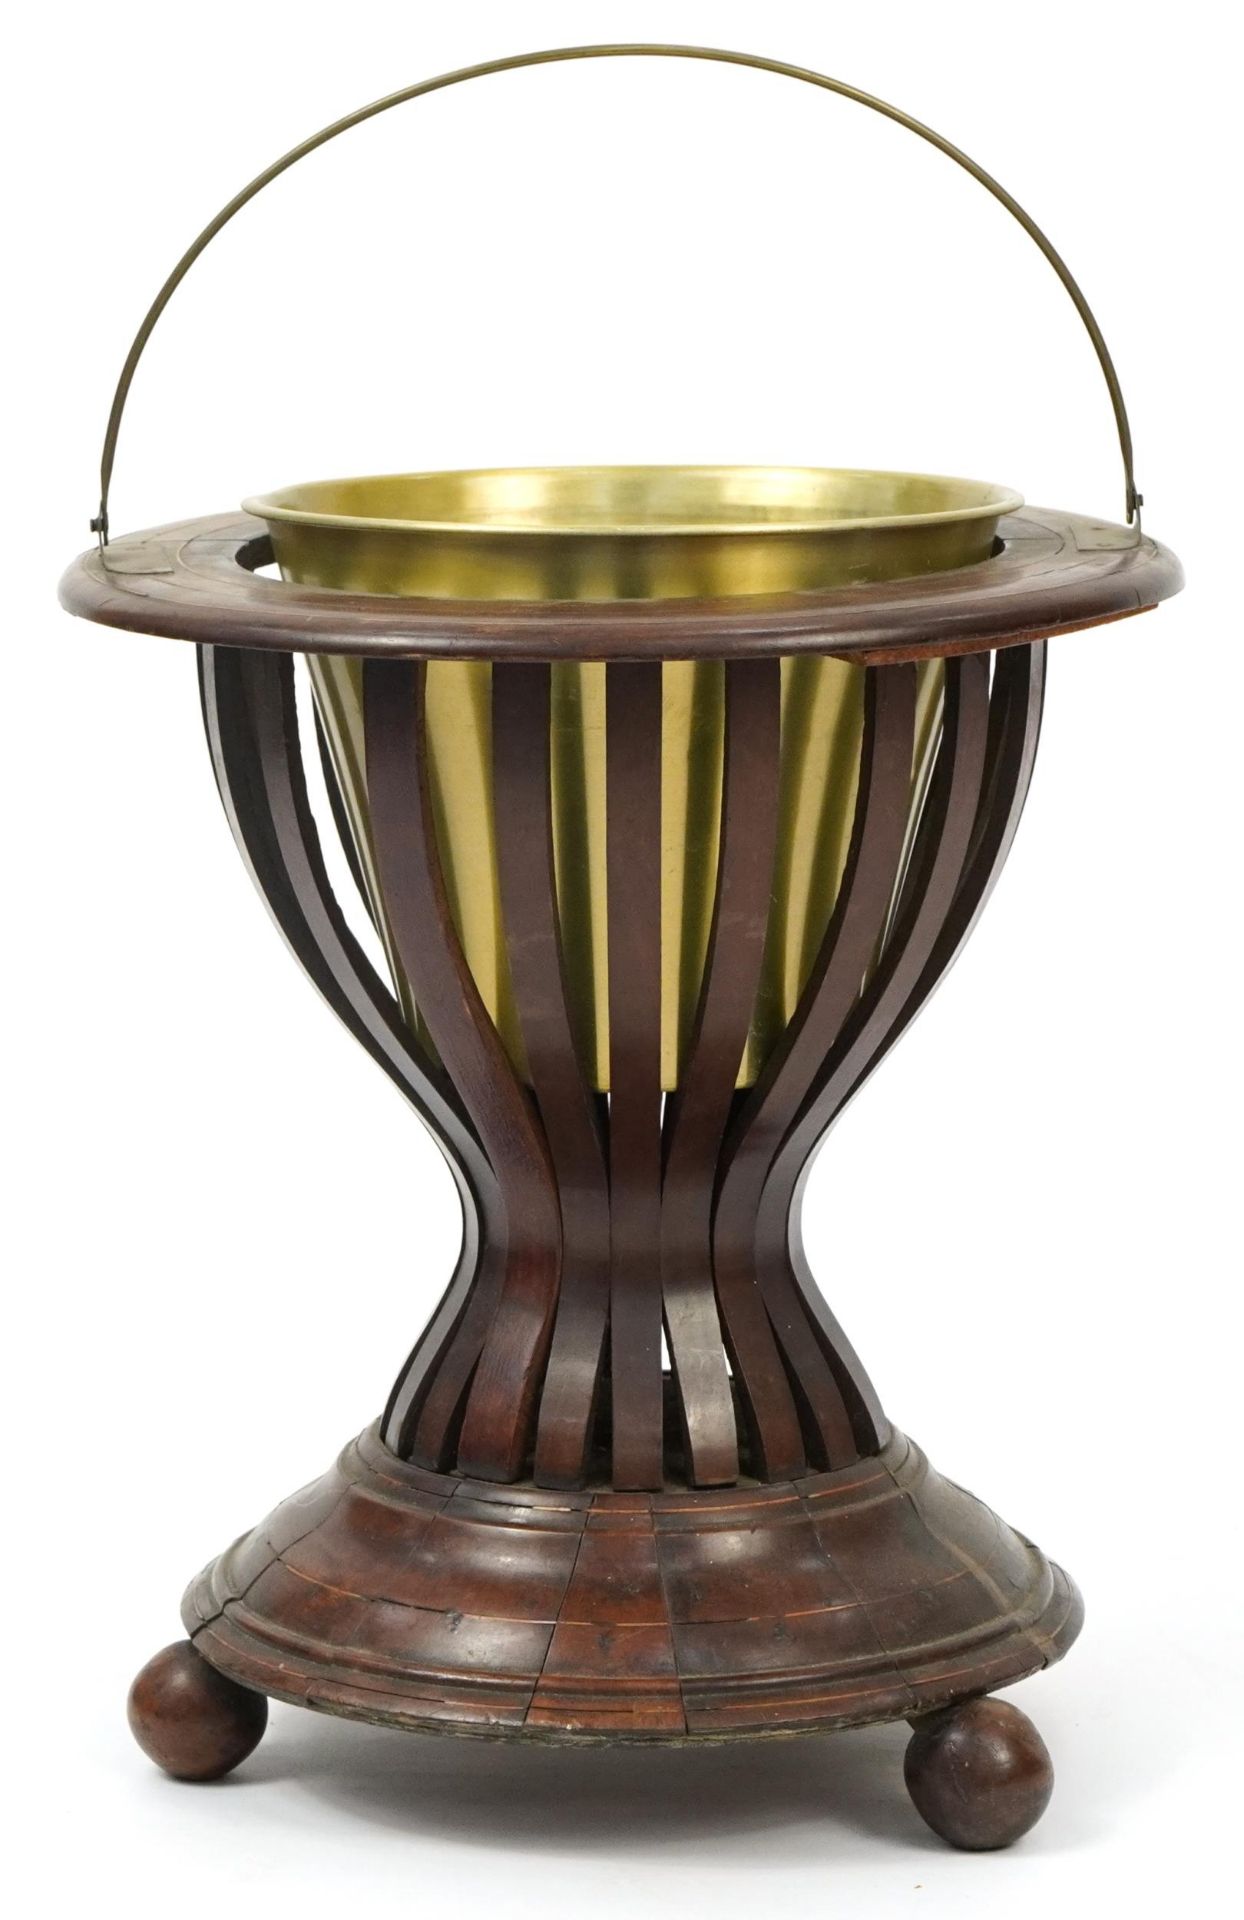 Regency style inlaid mahogany planter with brass liner and swing handle, 42cm high x 37cm in